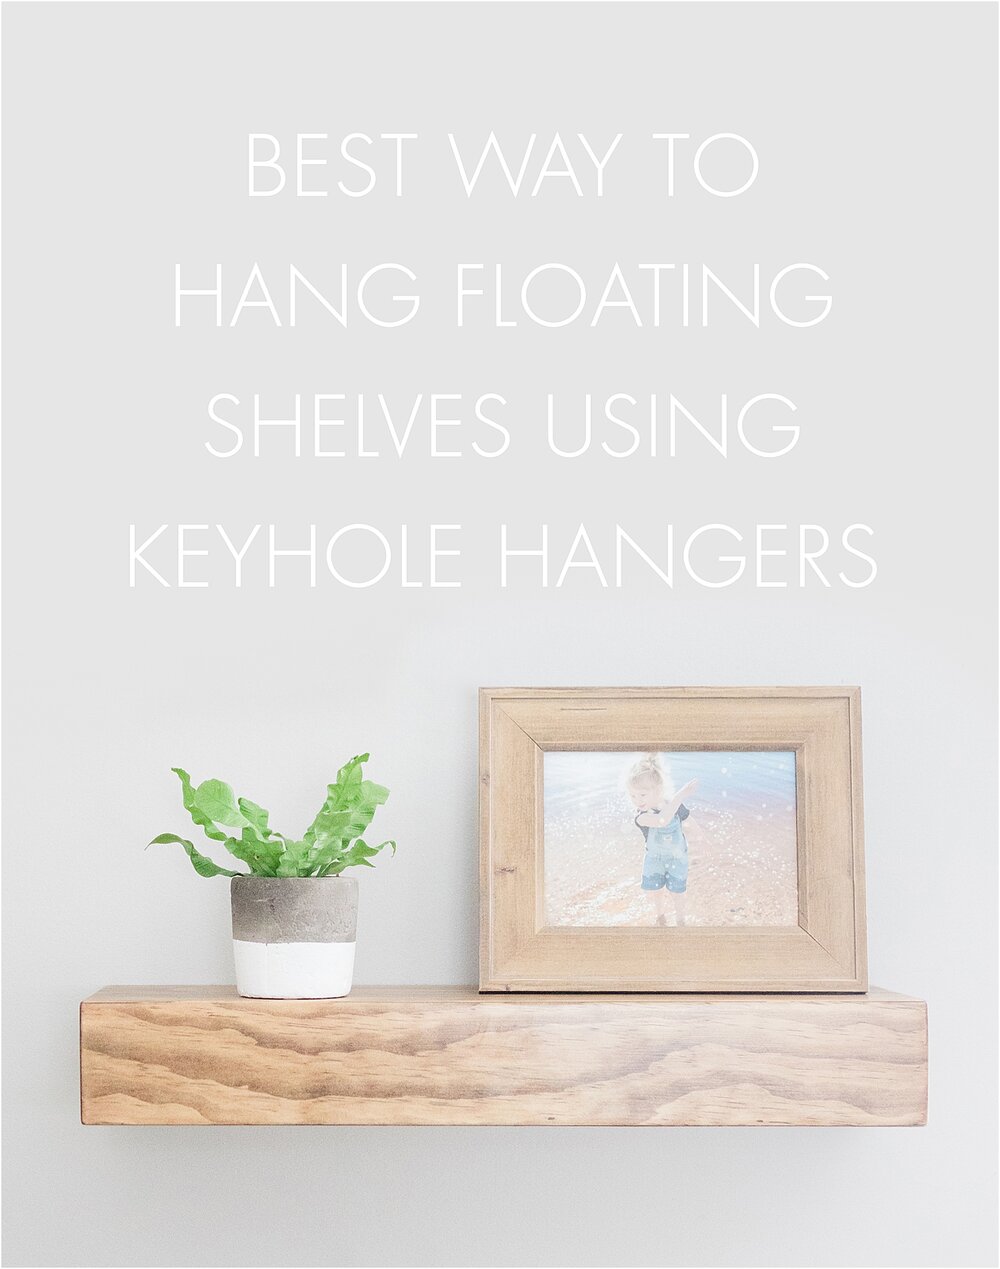 How To Hang Floating Shelves With, How To Hang Floating Shelves Straight